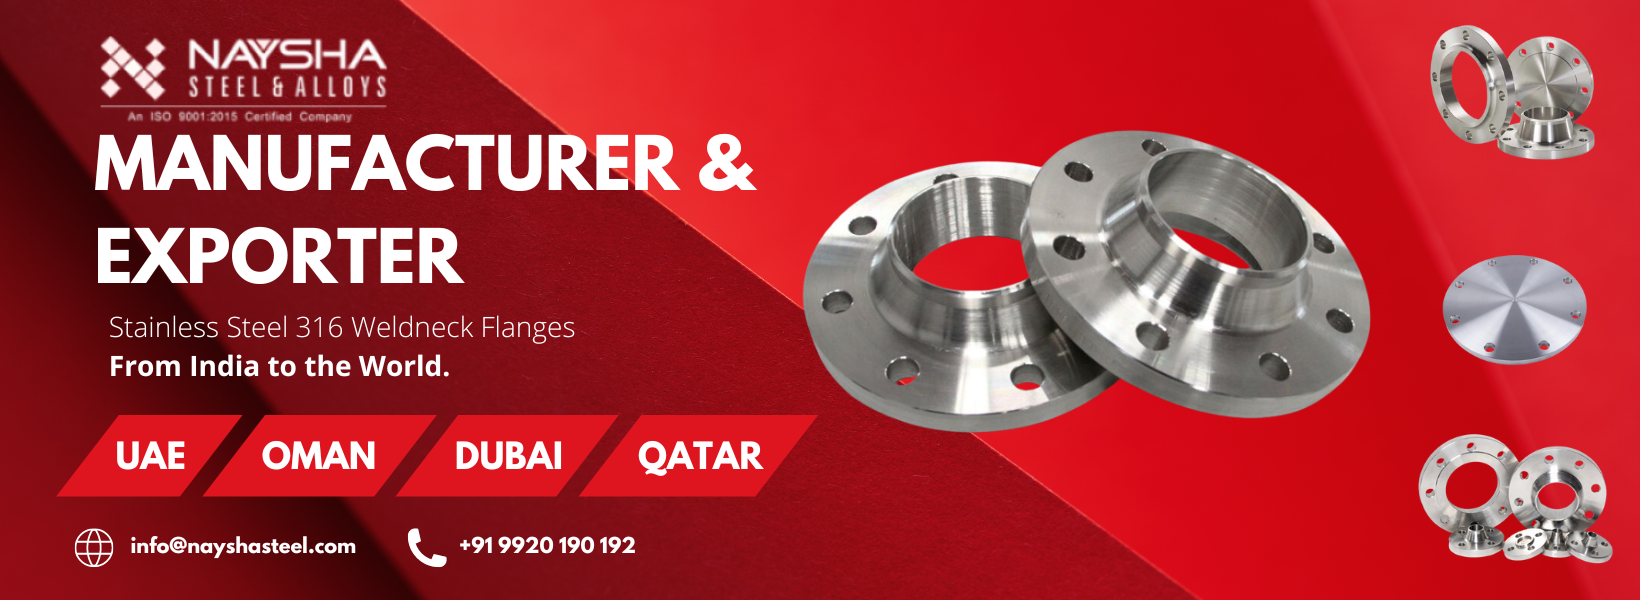 Stainless Steel 316 Weld Neck Flanges Manufacturer and Exporter in UAE